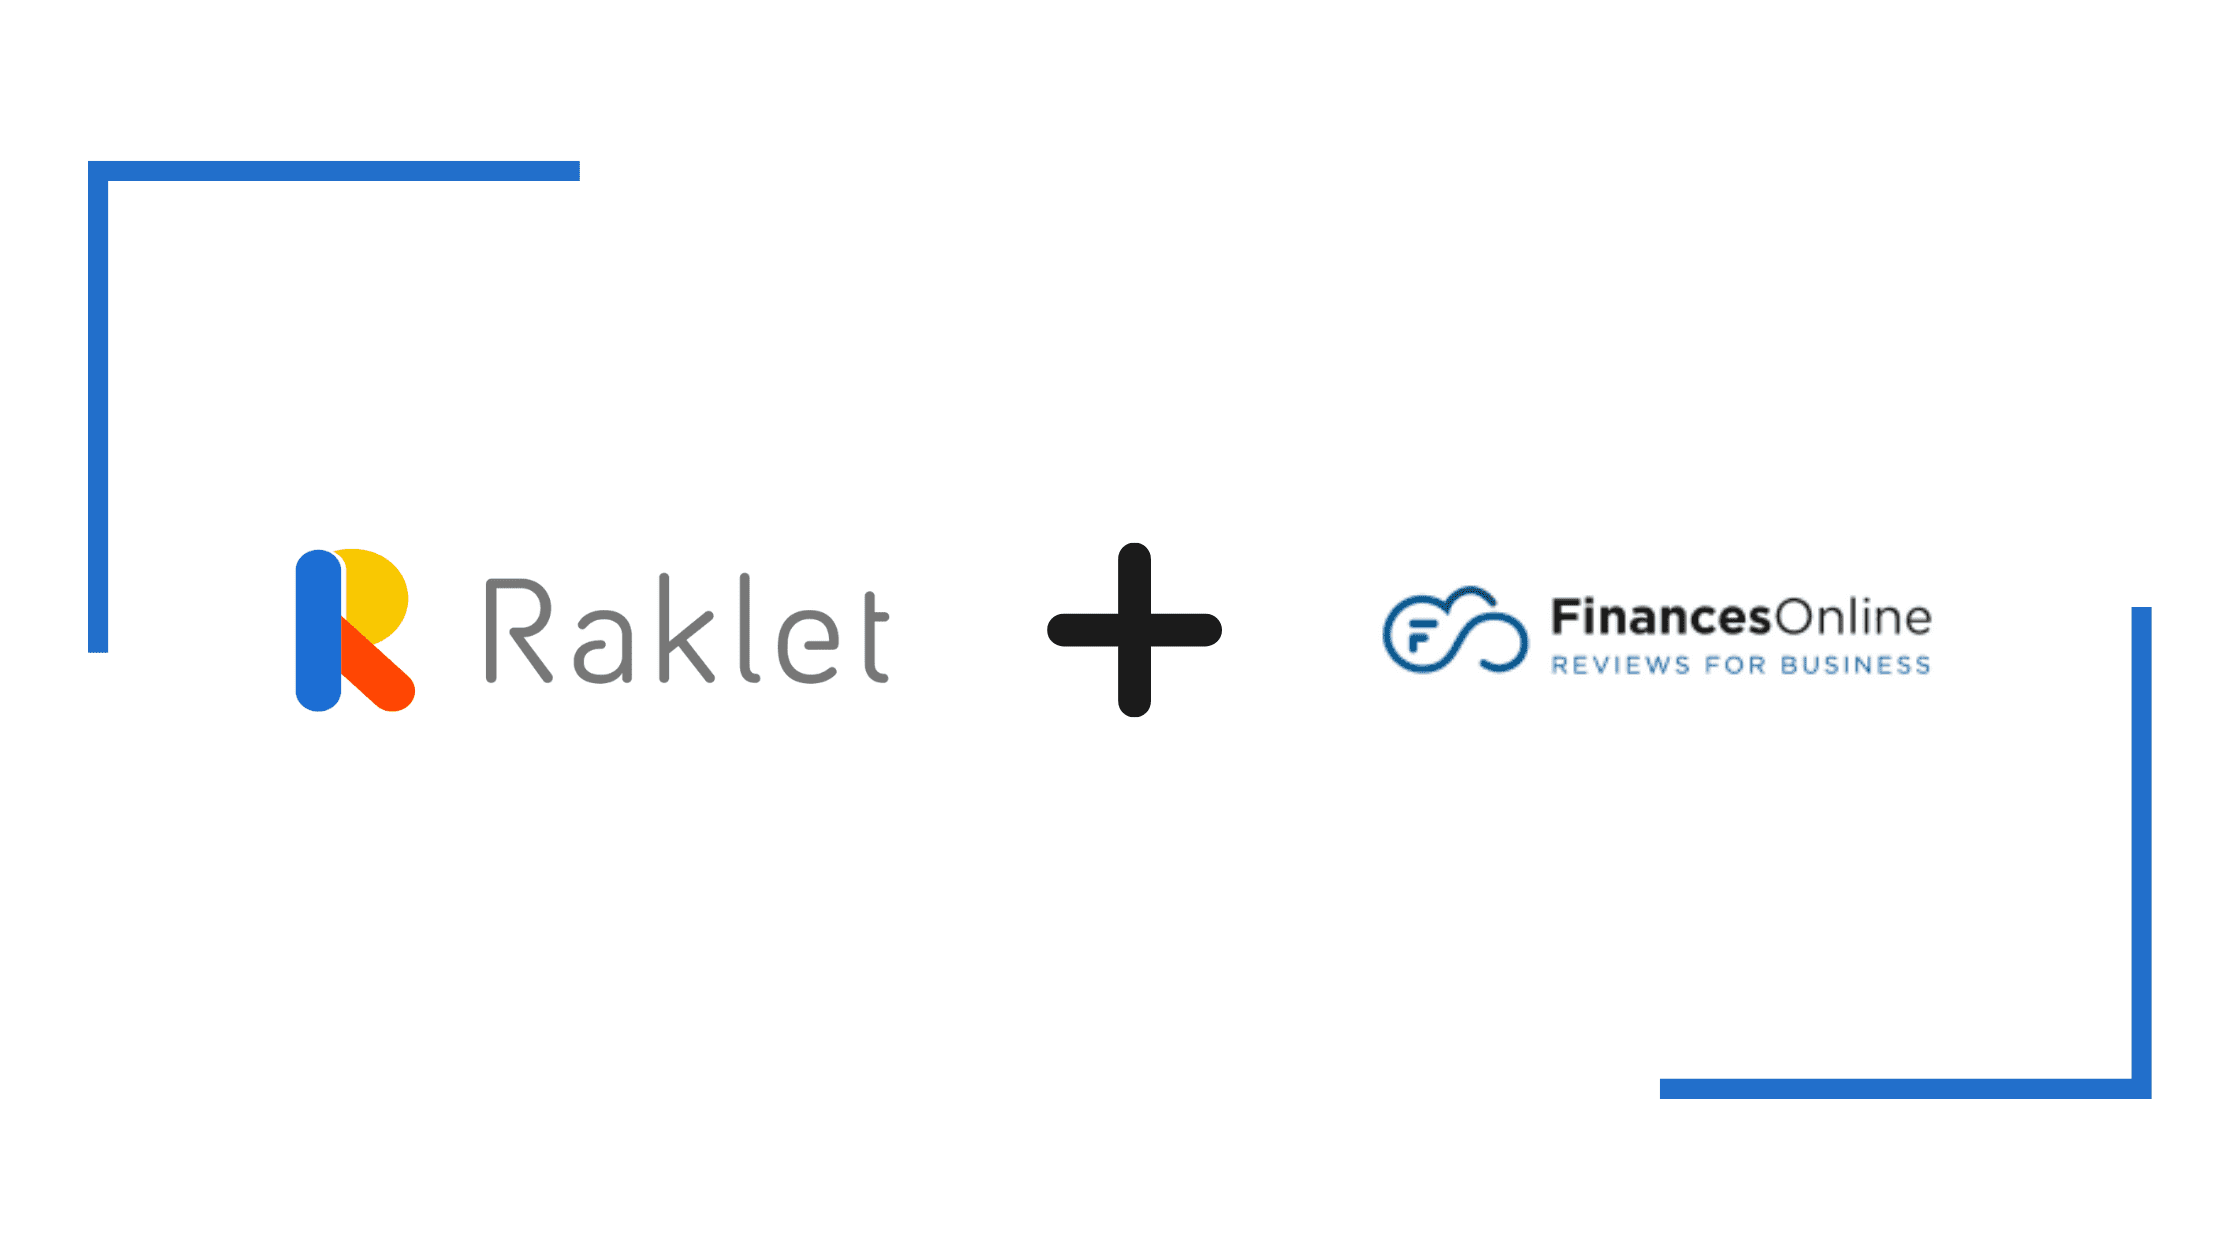 Raklet: The Rising Star of Community Management Services, According to Finances Online!